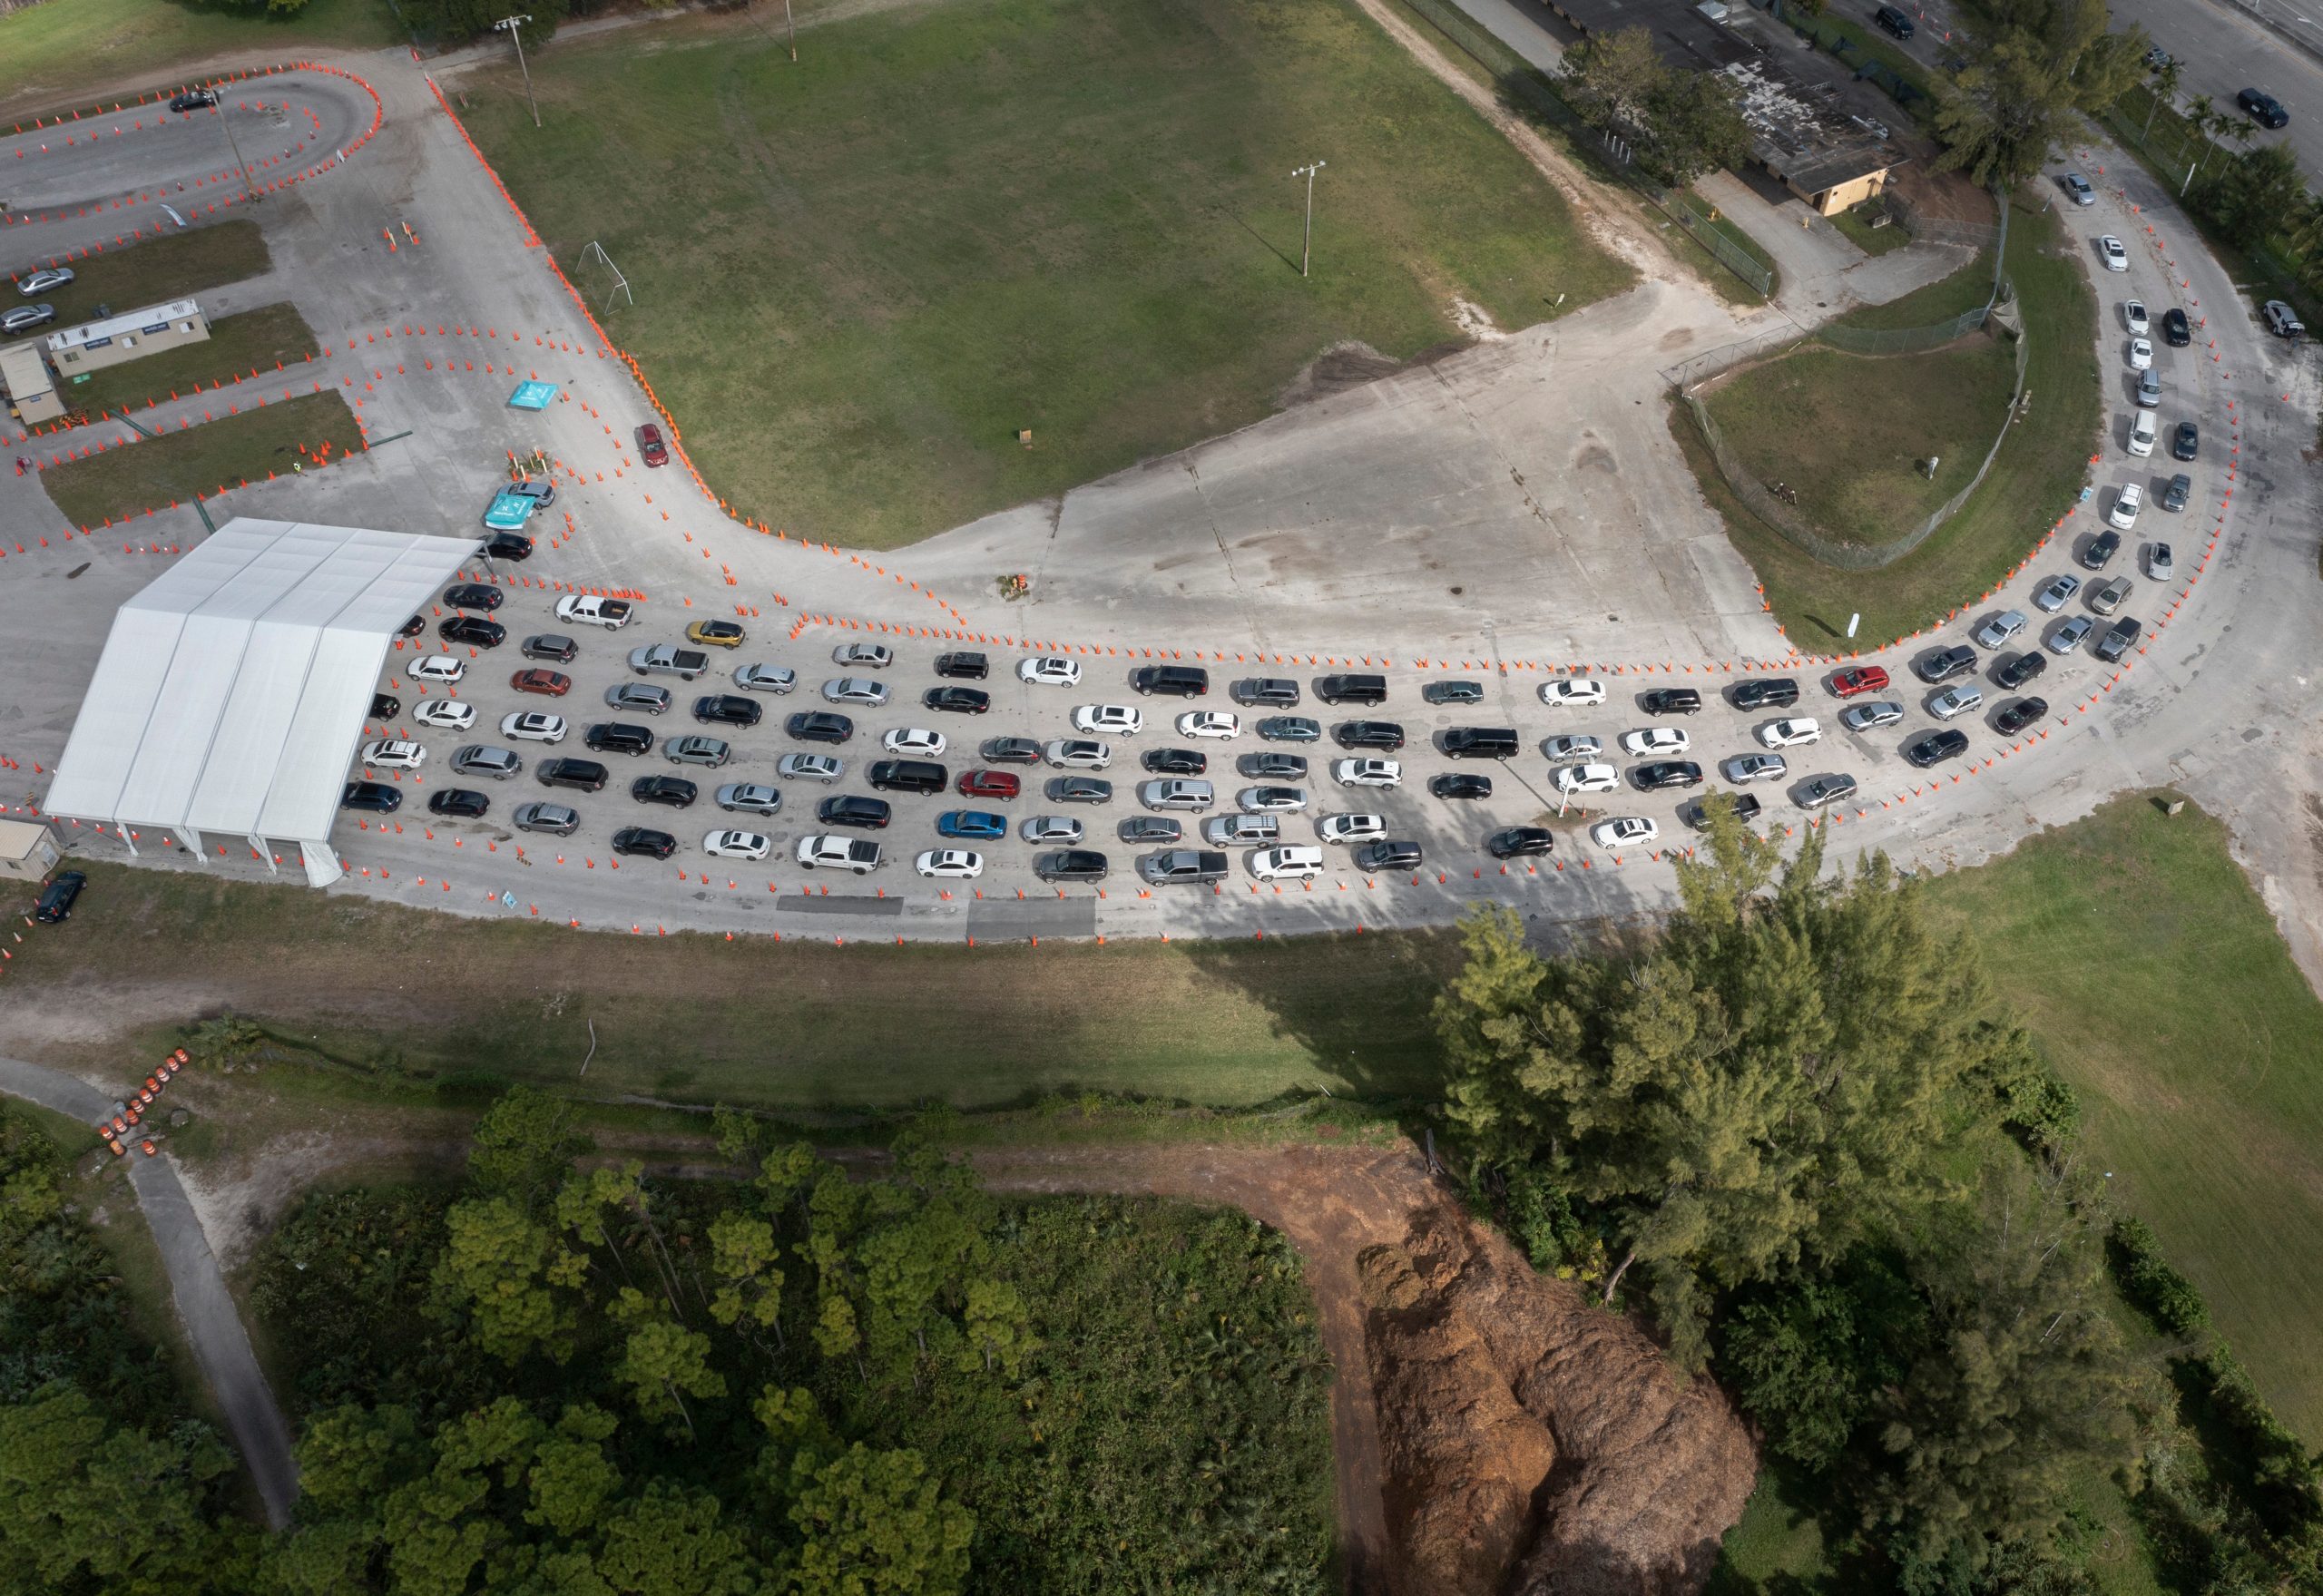 Cars line up at a drive-thru covid-19 testing site in Miami, Florida on December 17, 2021. (Photo: Joe Raedle, Getty Images)